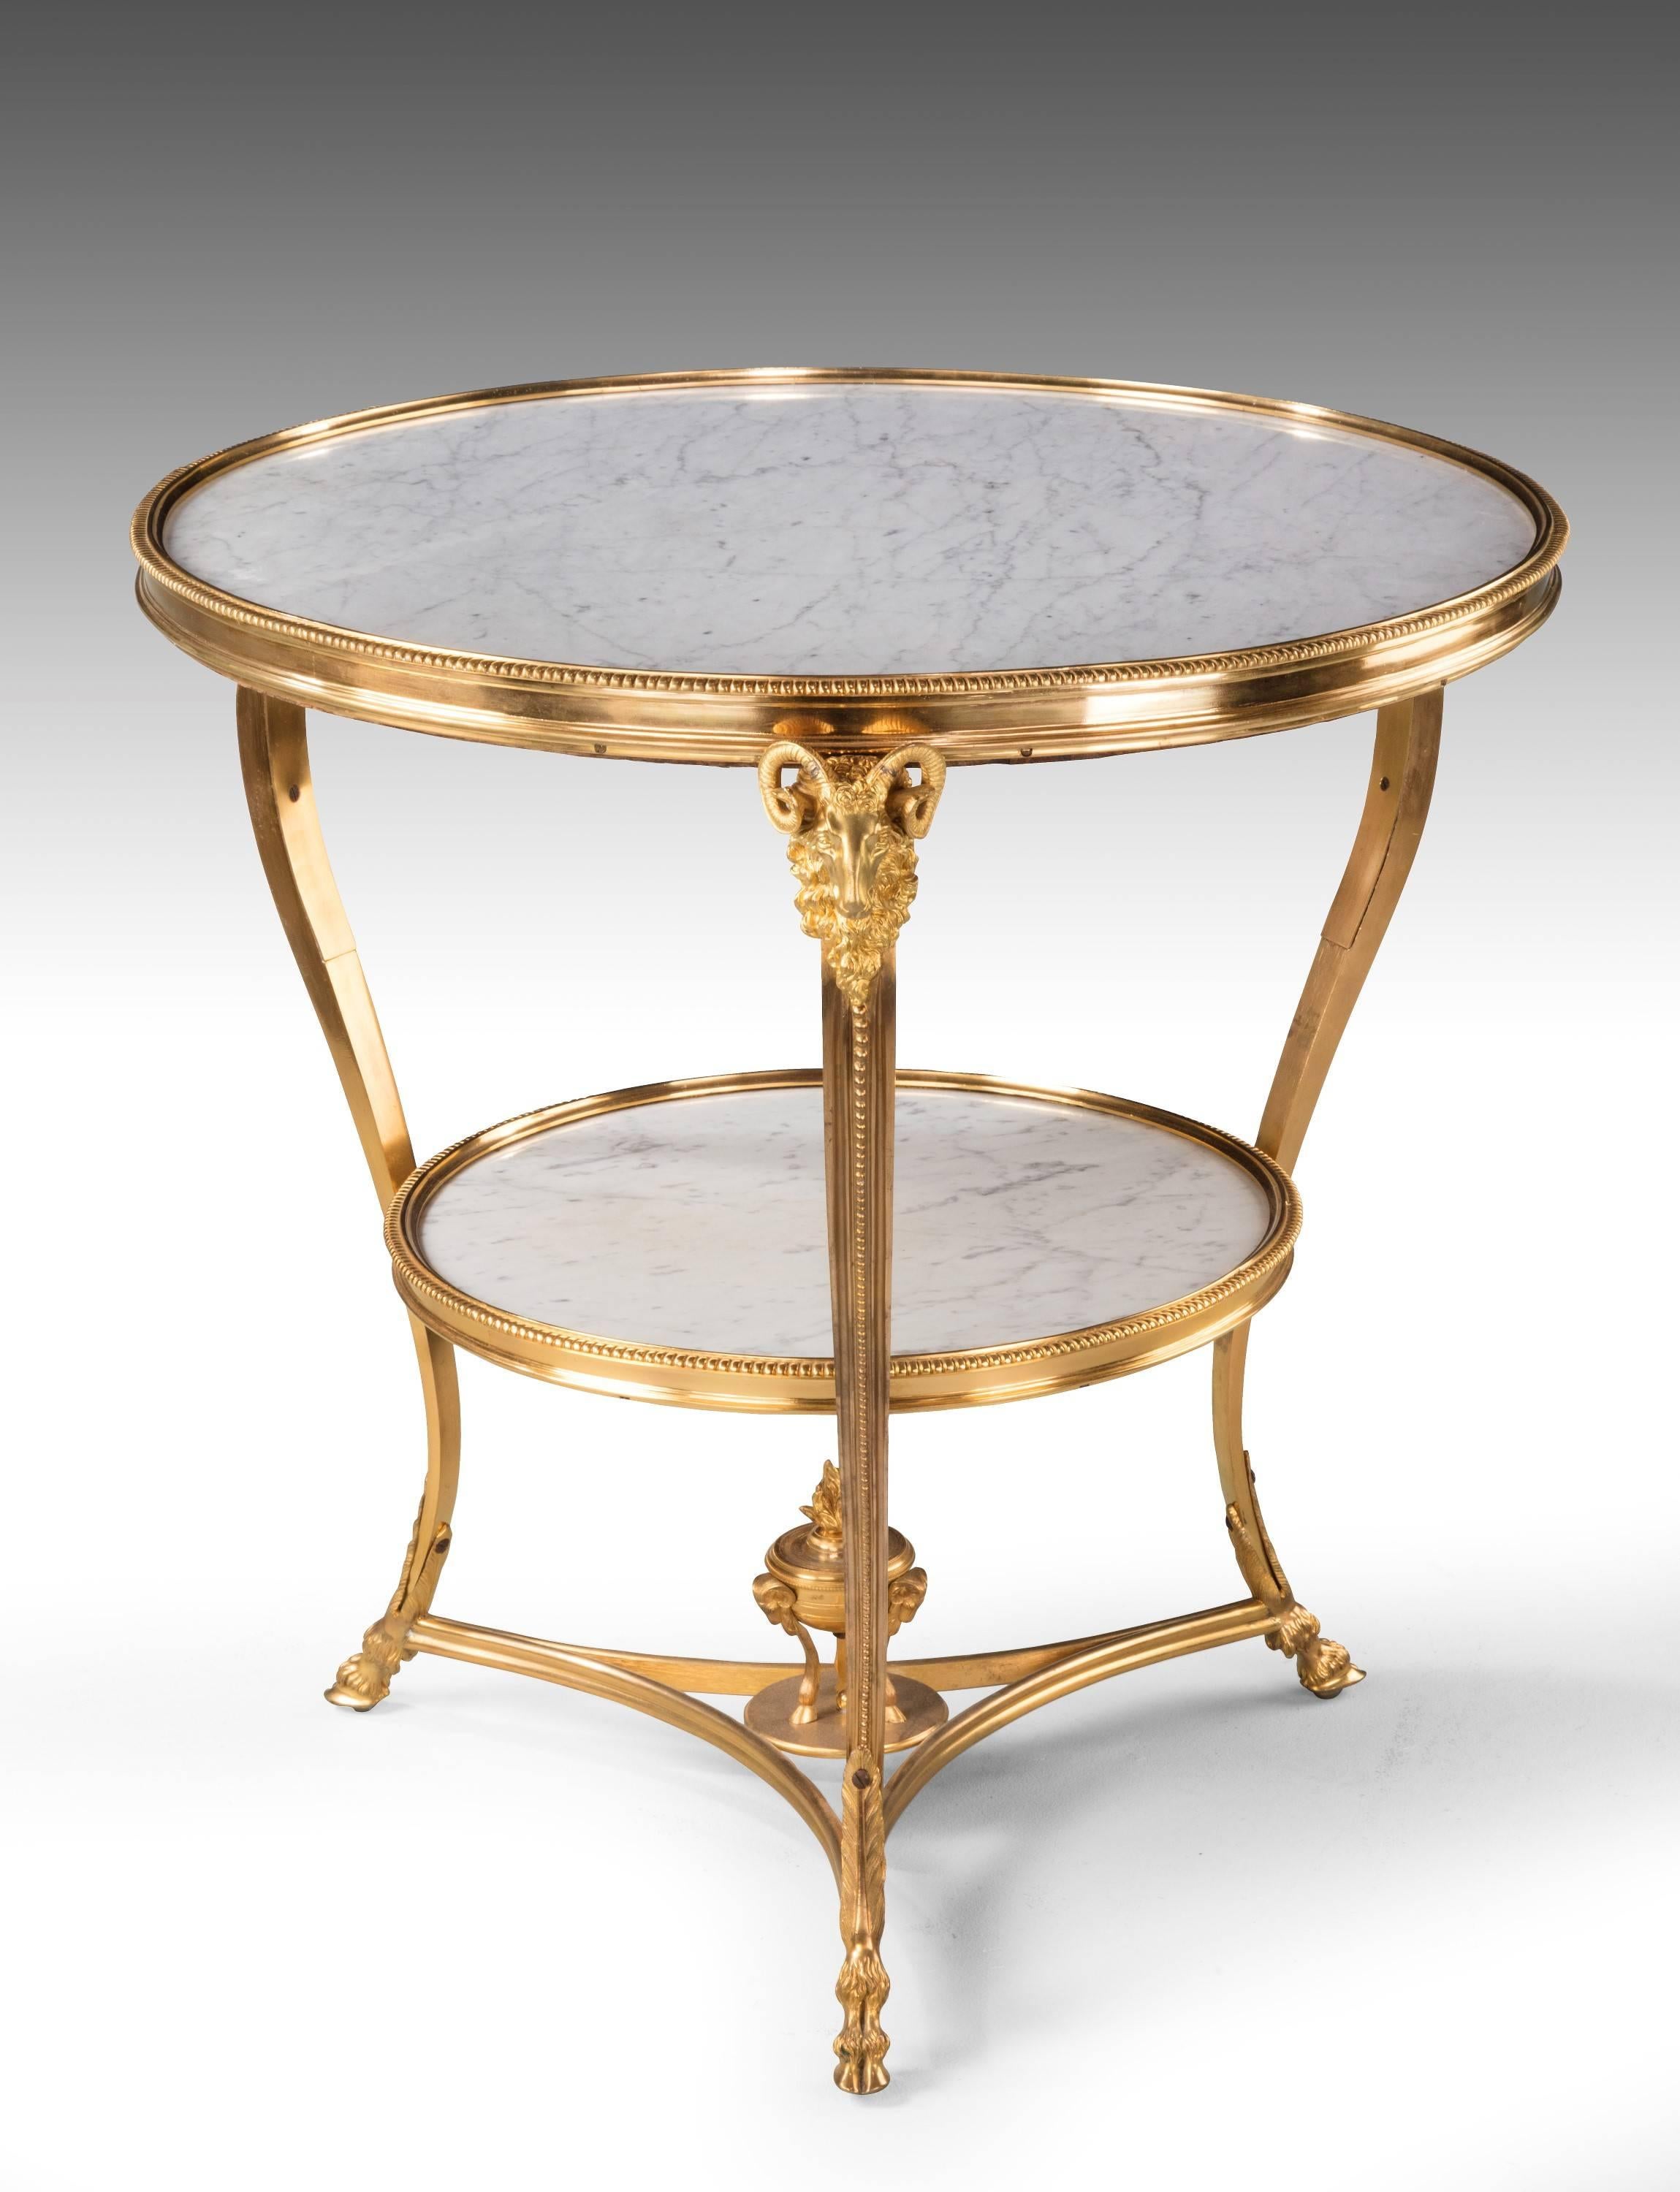 Fine quality French two-tier gueridon in gilt bronze retaining the original gilding. The two centre sections retaining the original finely veined grey and white marble top. The supports with beautifully cast ram’s heads. 

Excellent overall